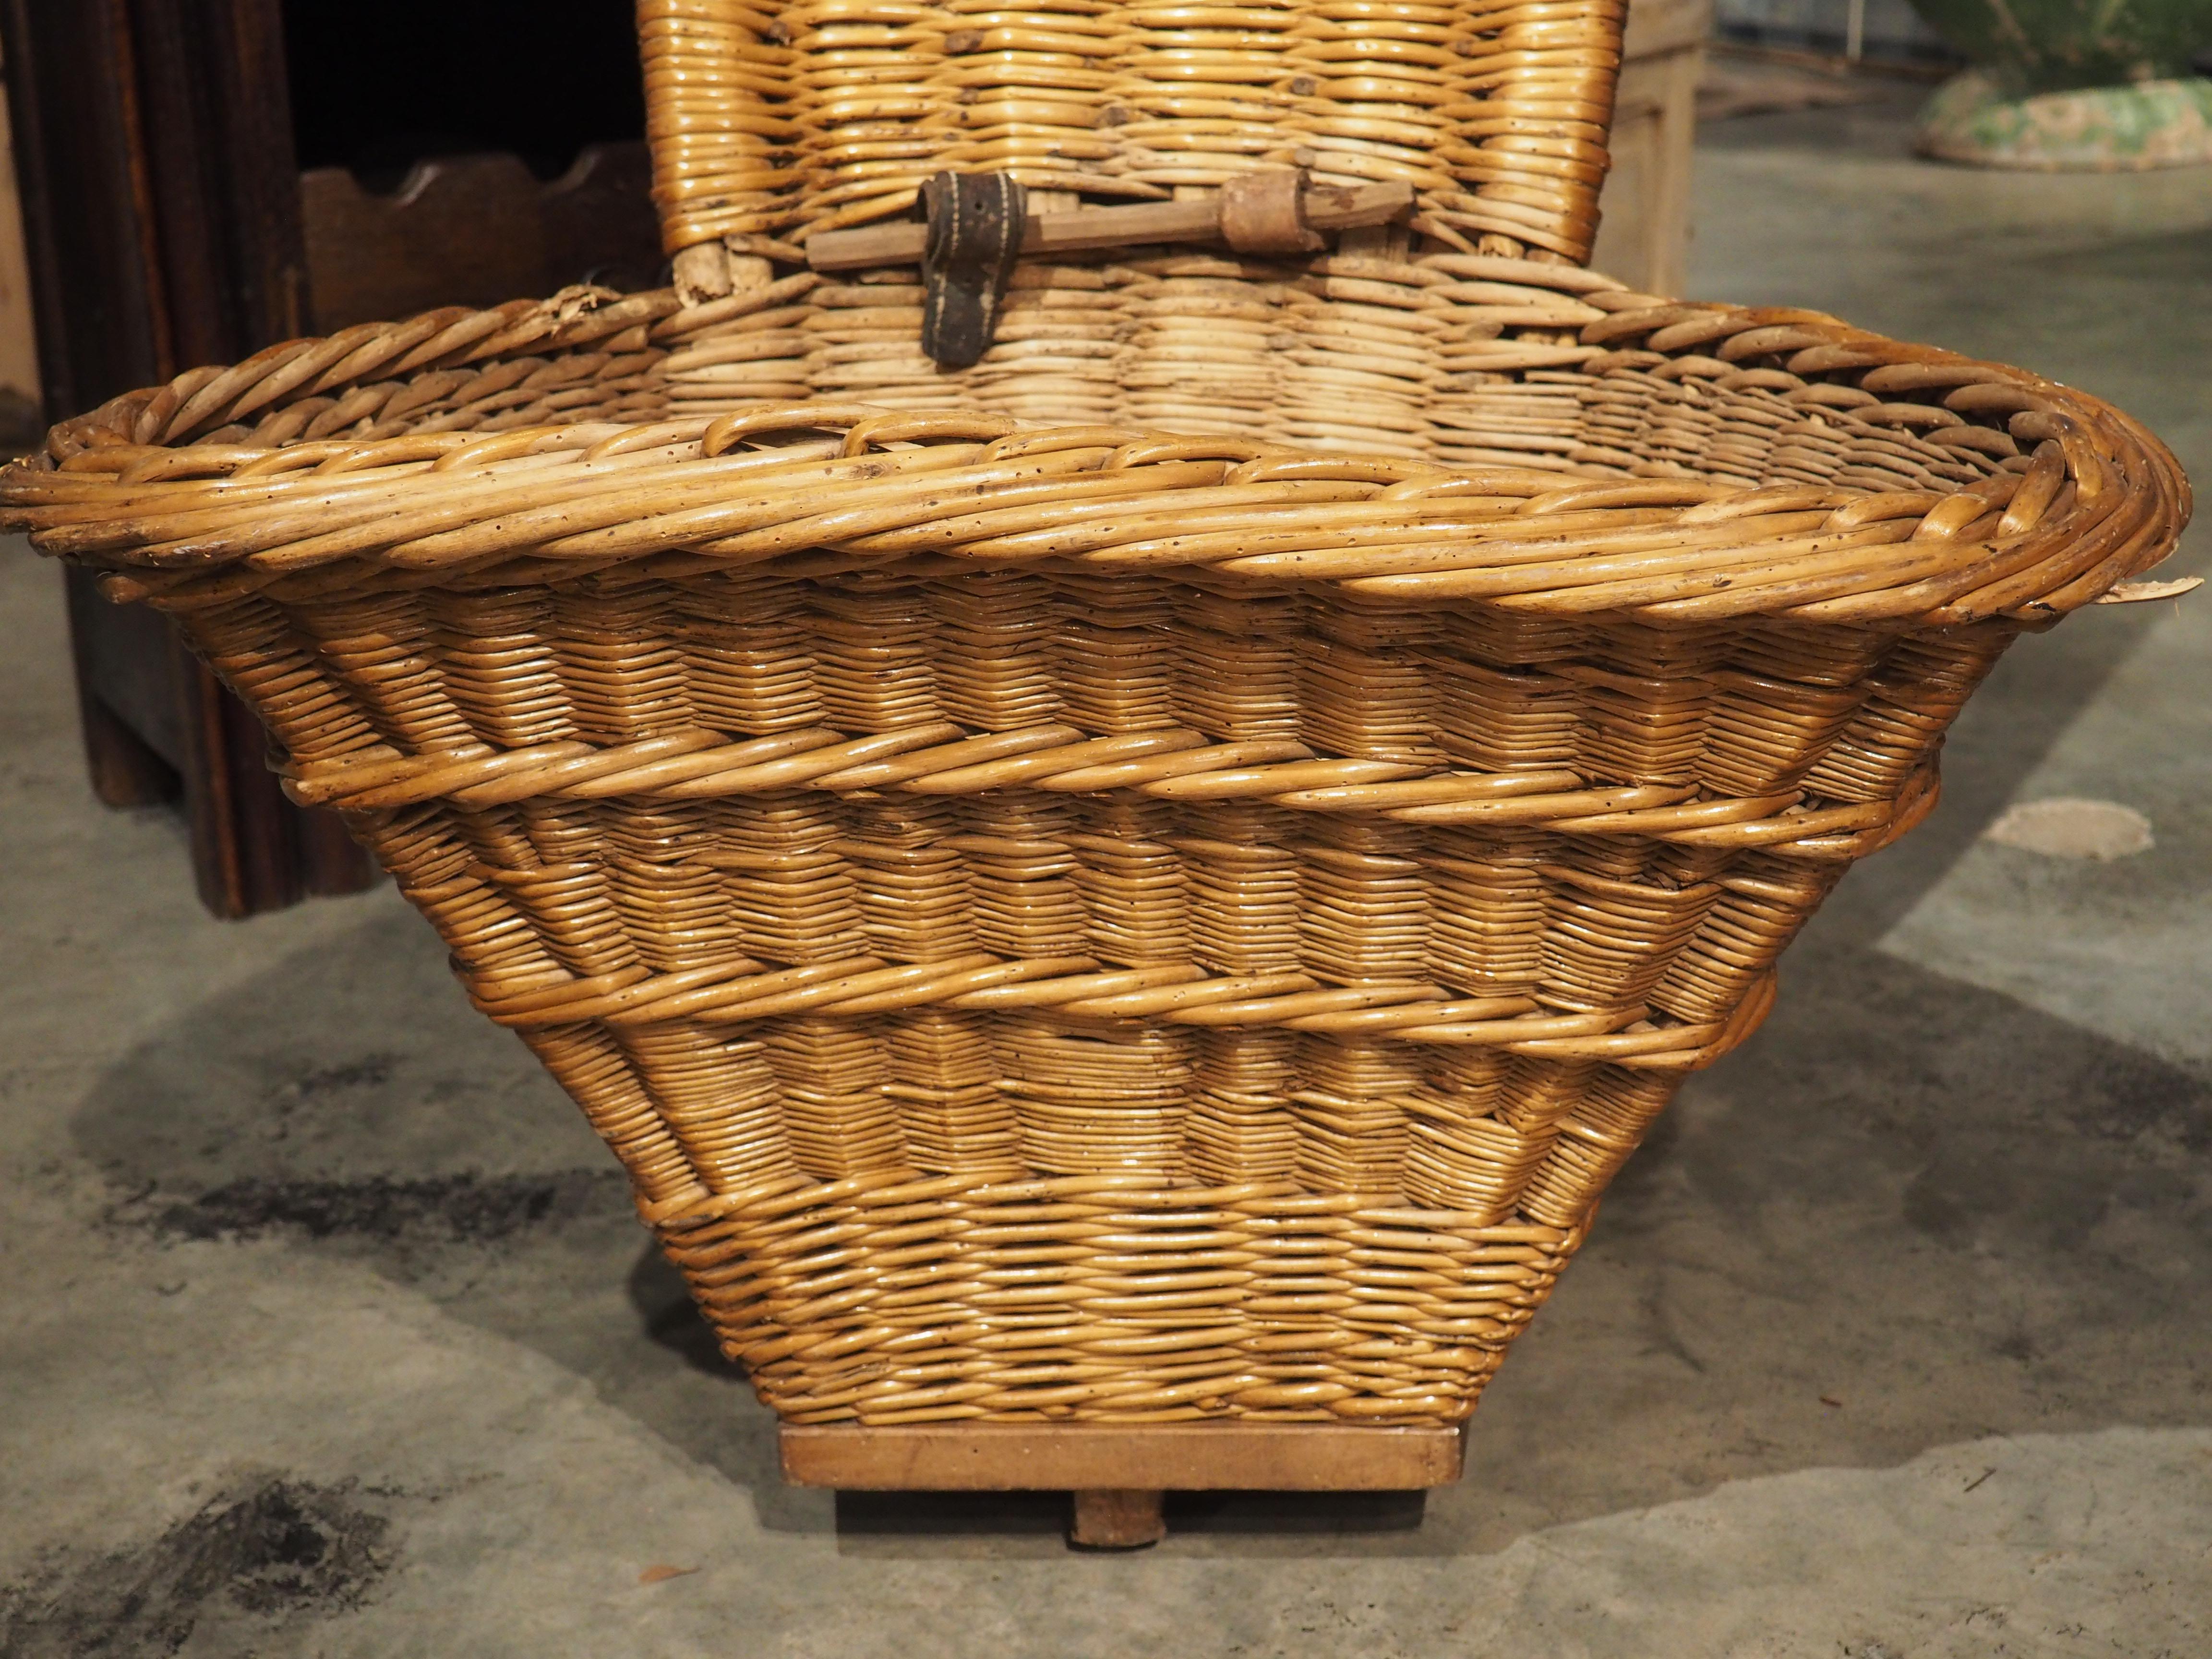 Late 19th Century Handwoven Wine Grape Harvesting Basket from Beaune France, circa 1890